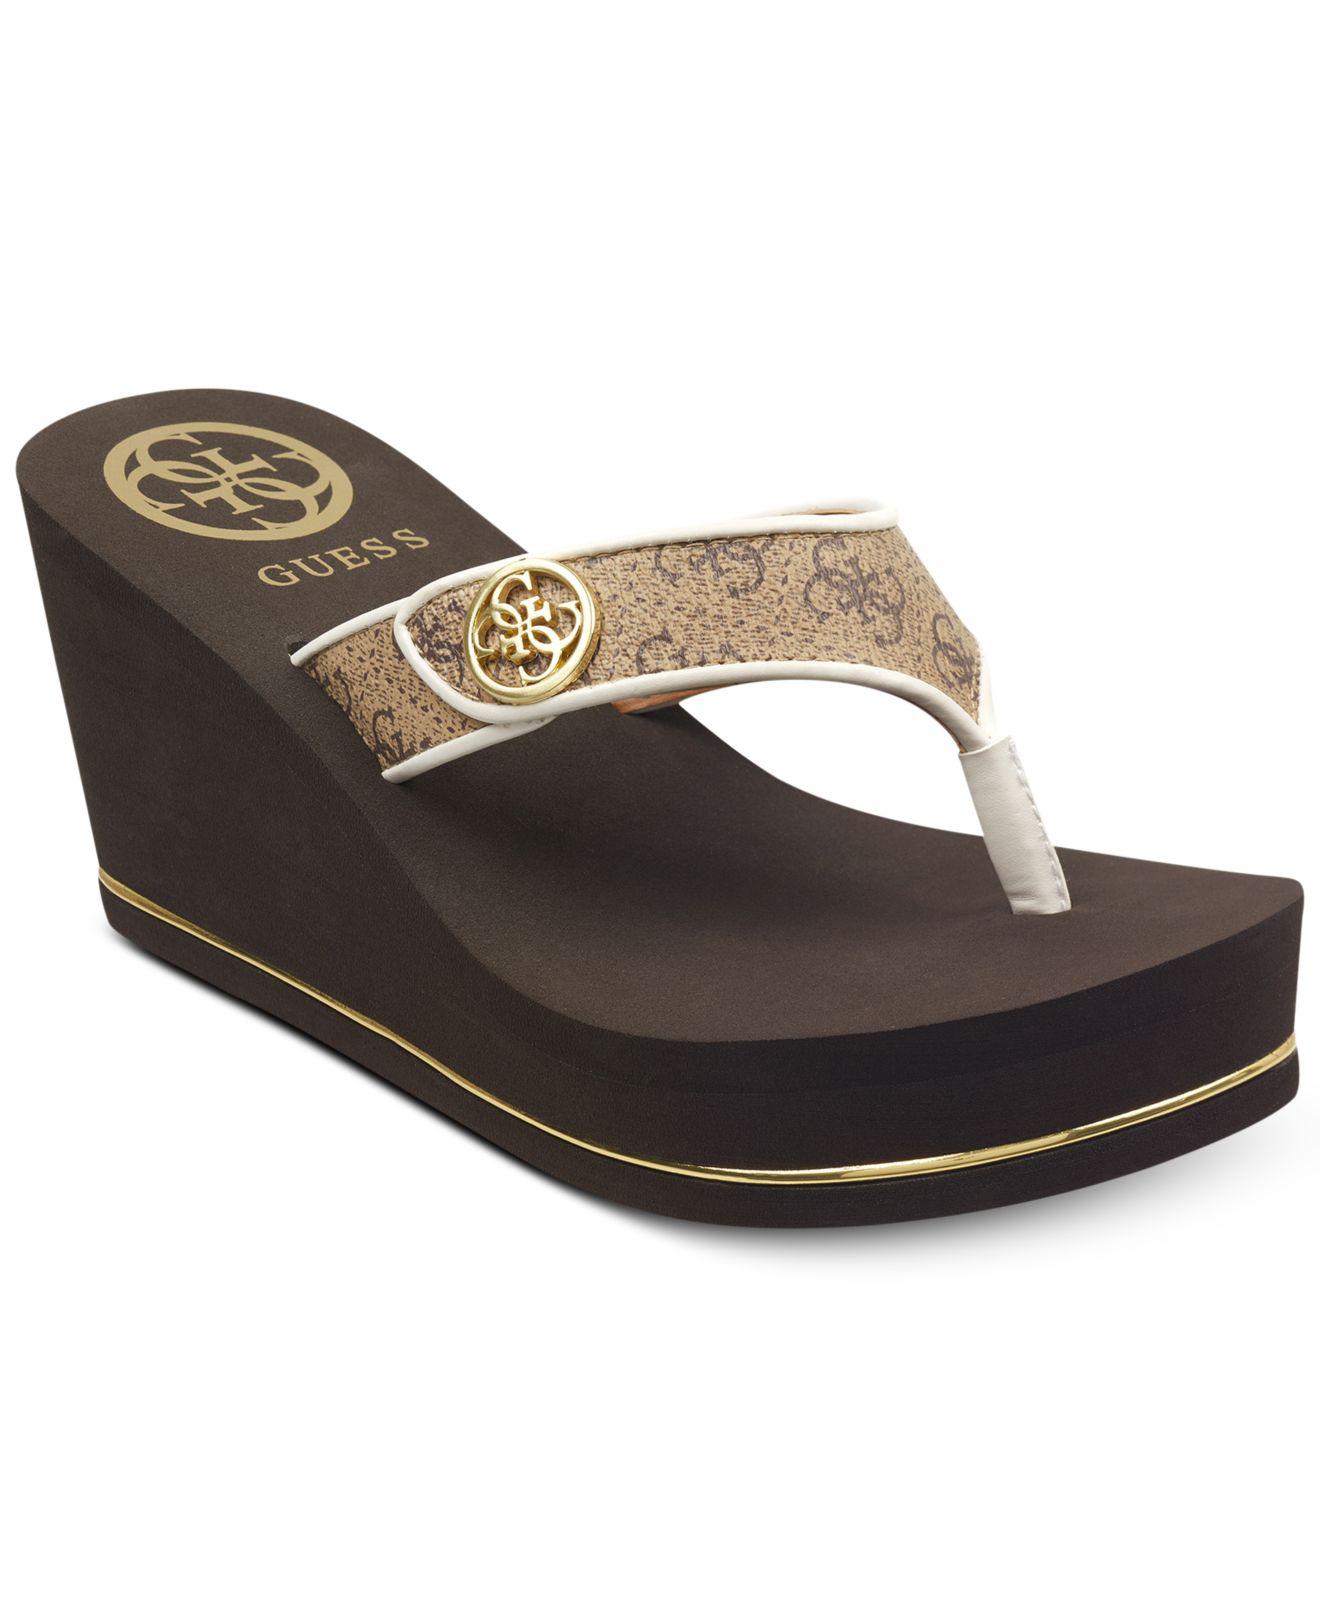 Guess Sarraly Logo Wedge Sandals in Brown